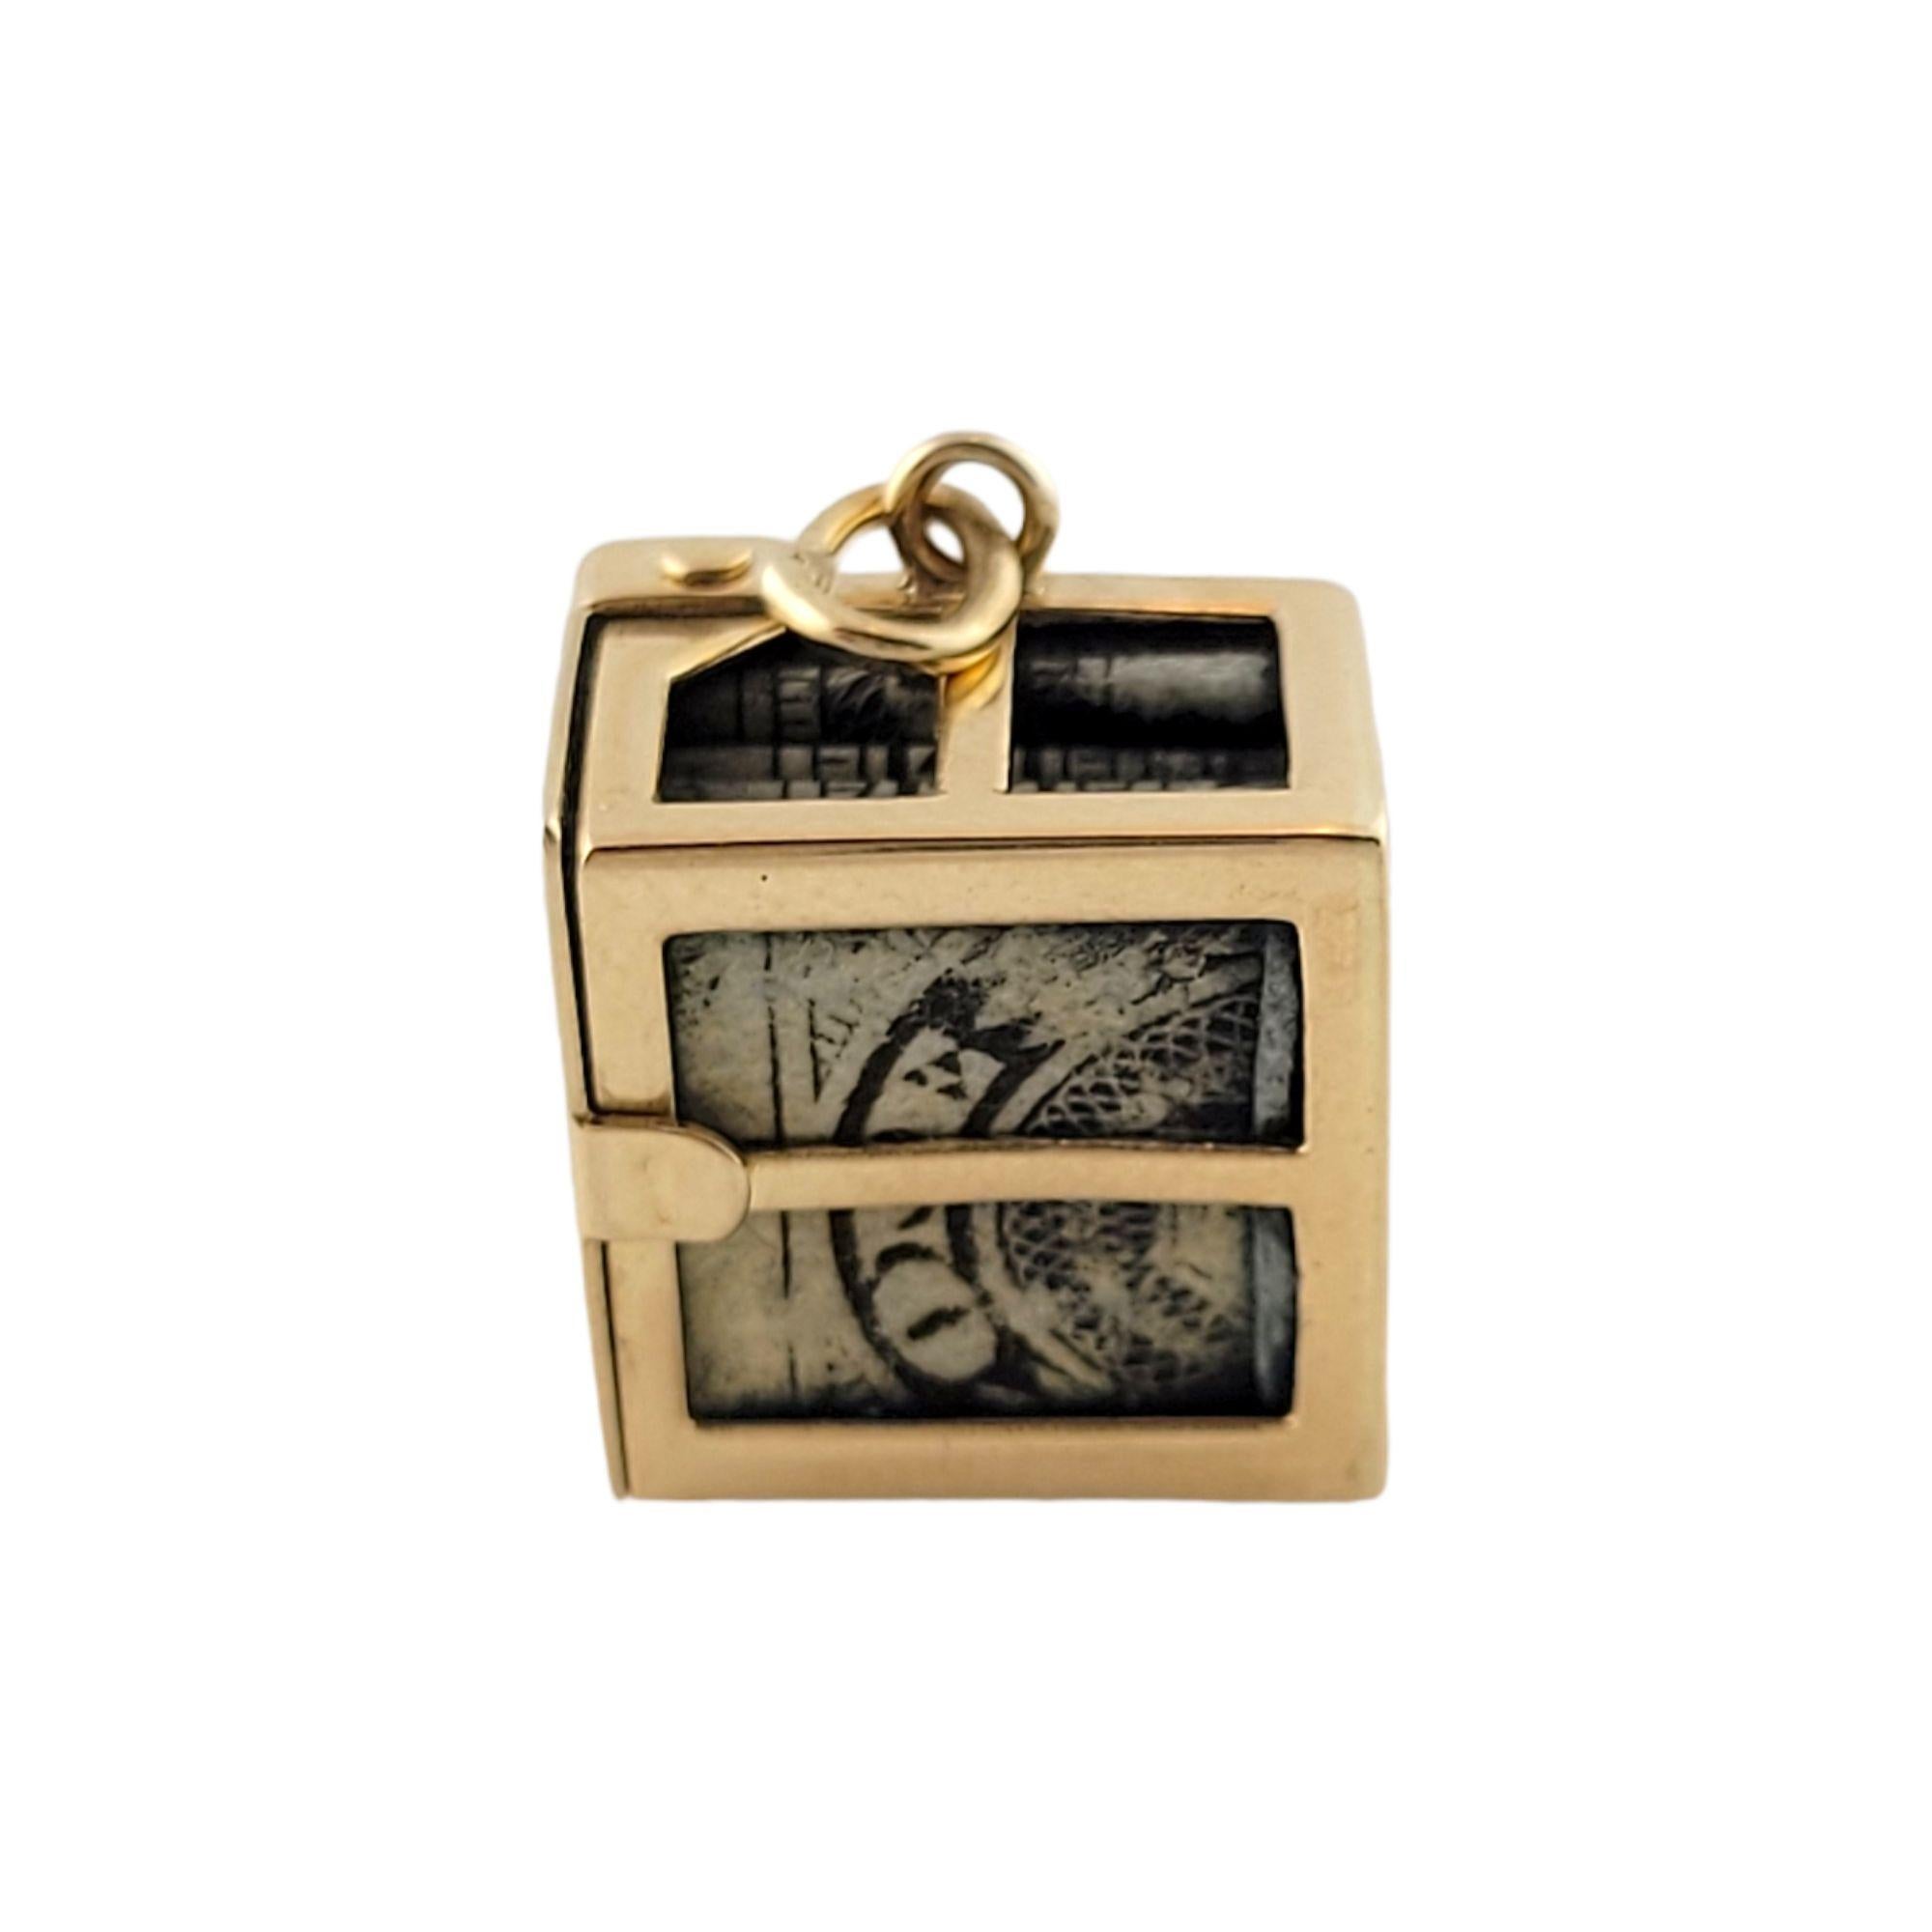 Vintage 14K Yellow Gold Mad Money Box Charm

Adorable mad money box charm made from 14K yellow gold!

Size: 13mm X 13mm X 9.5mm

Weight: 3.6 g/ 2.3 dwt

Hallmark: 14K

Very good condition, professionally polished.

Will come packaged in a gift box